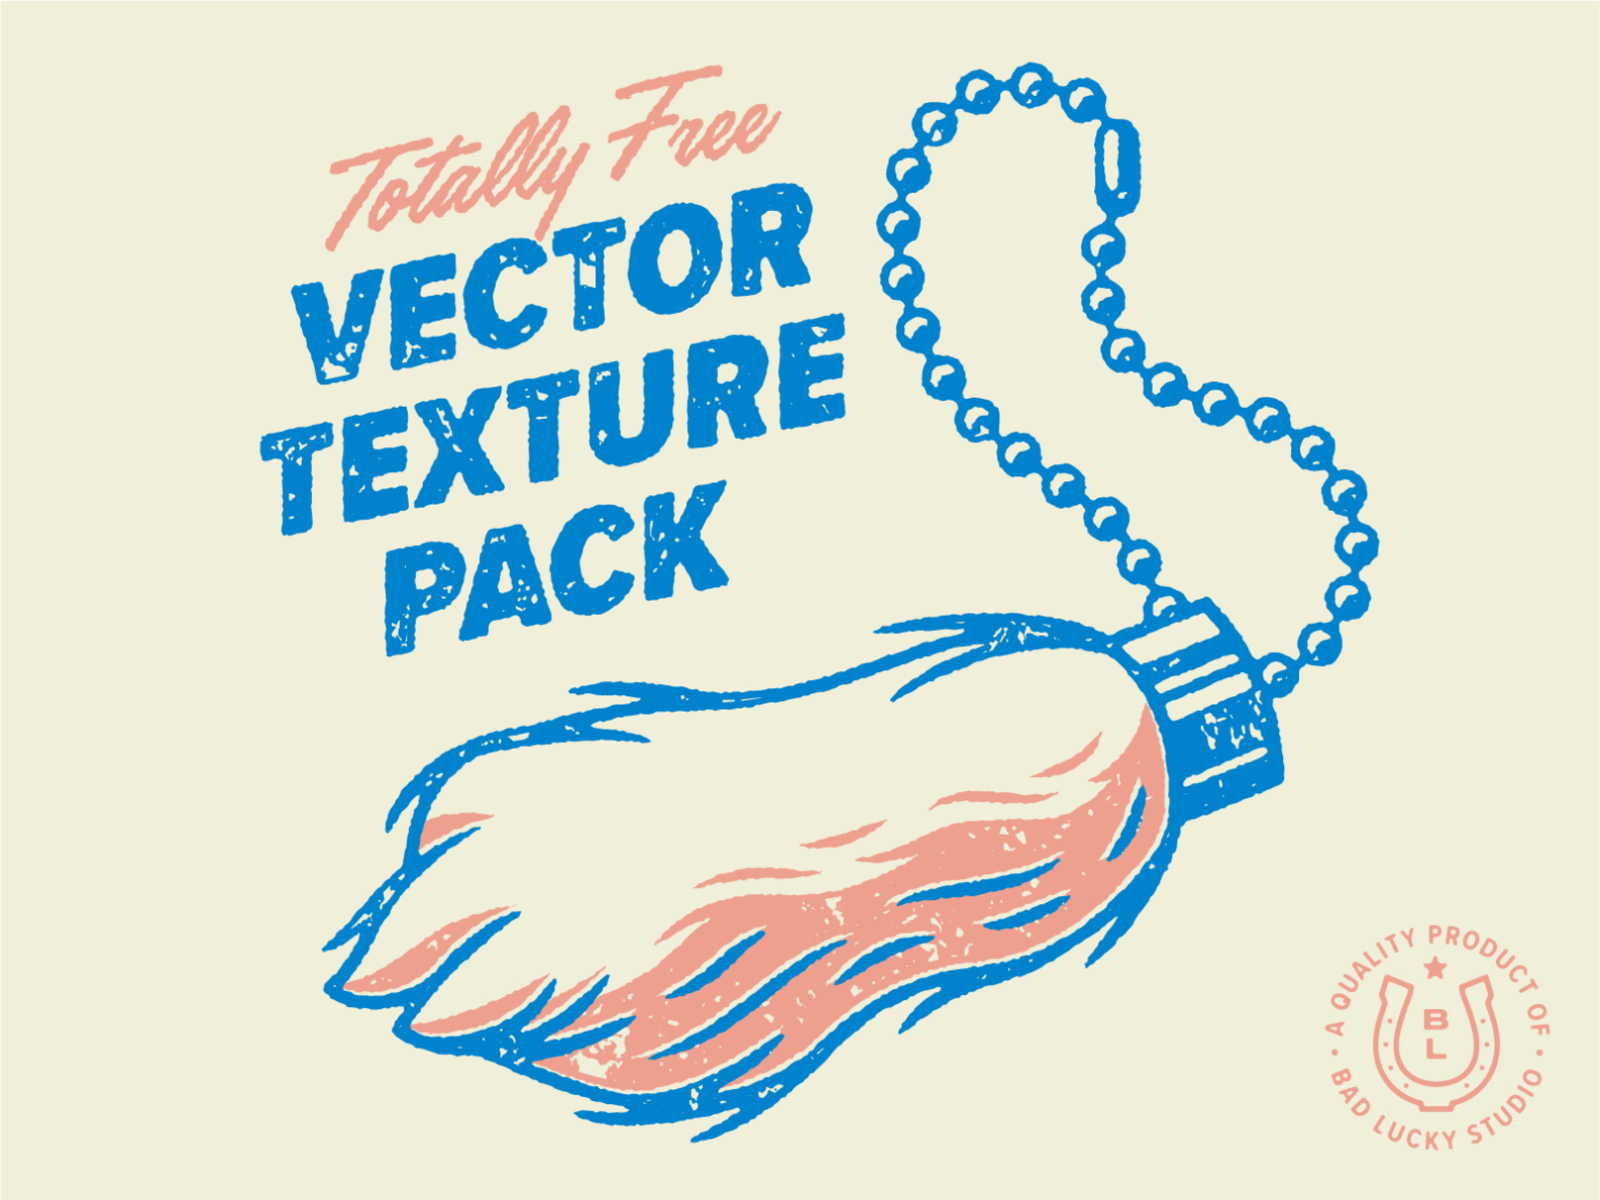 Totally Free Vector Texture Pack bad luck chain charm design foot free good luck illustration keychain luck lucky rabbit retro texture vector vintage